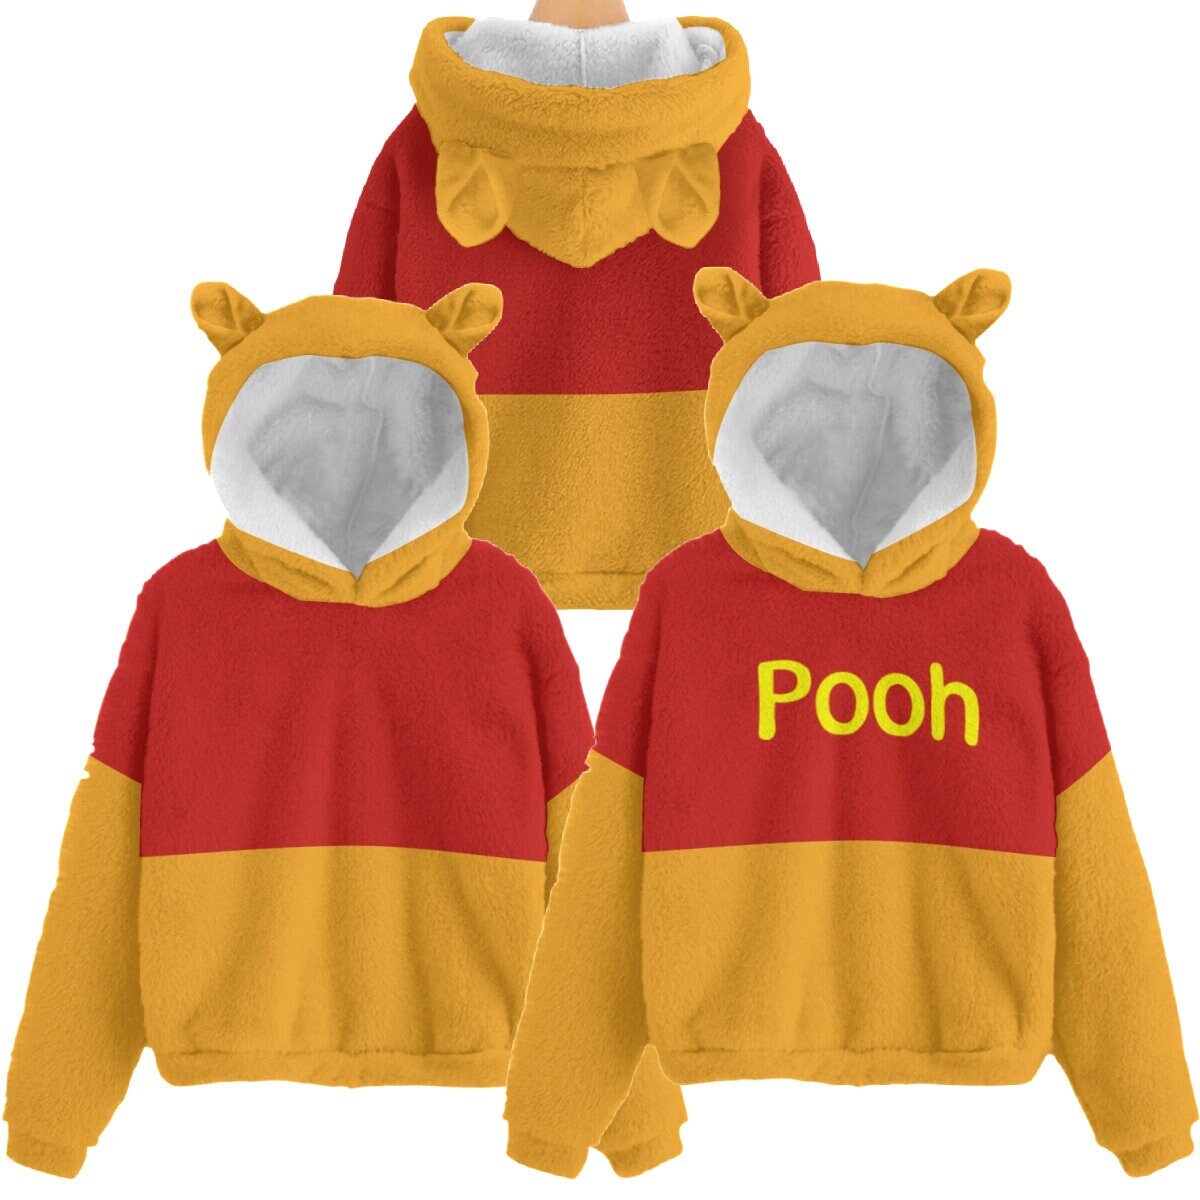 Toddler  2PC Outfit Sets Winnie The Pool Pullover Hoodie Size 1-4 years Old! 